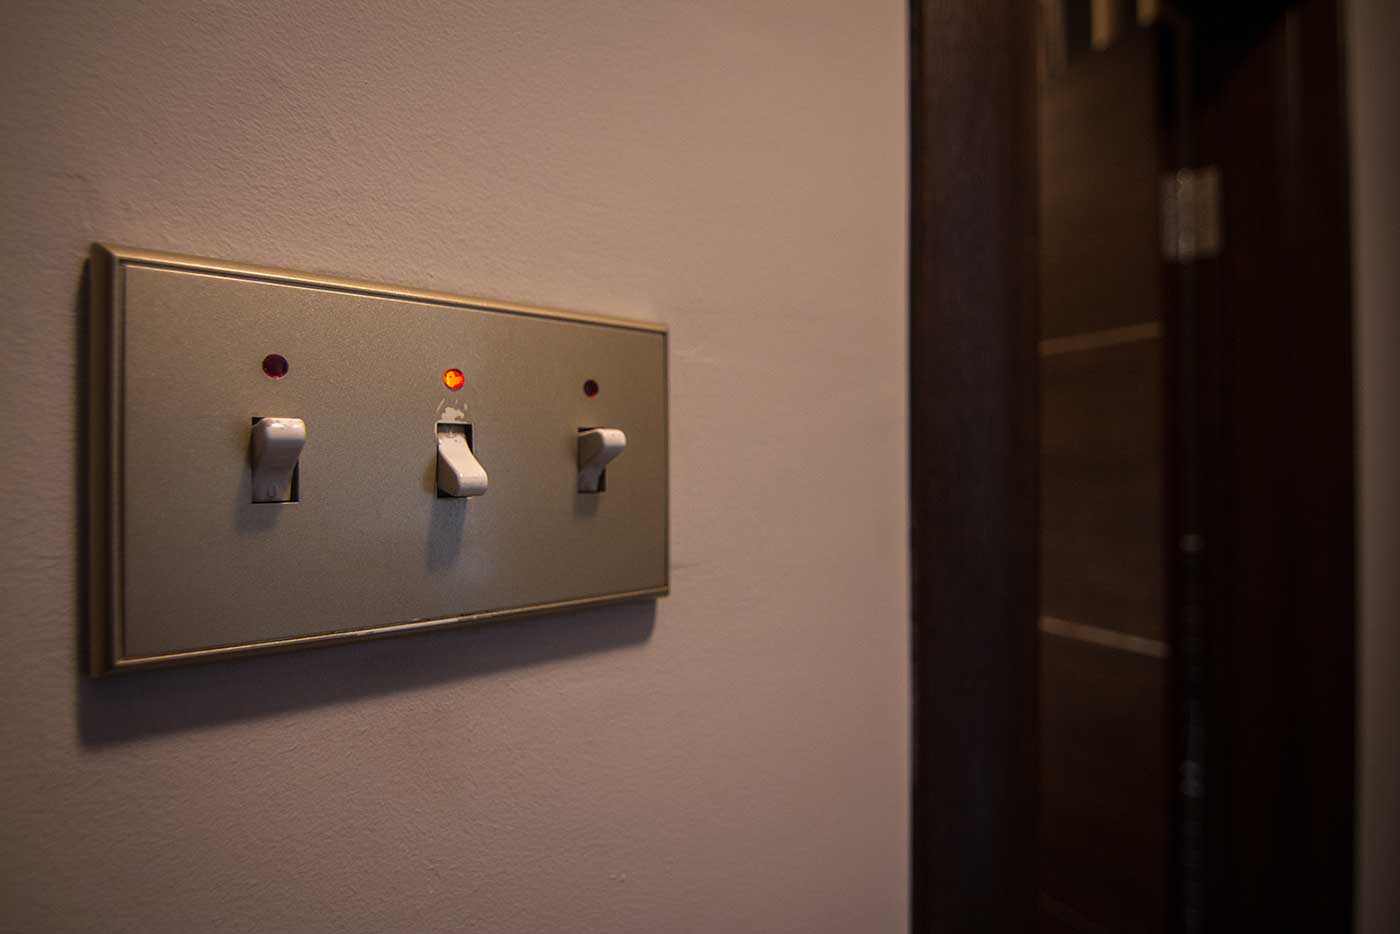 These heavy light switches inside the Genex Tower are extraordinarily satisfying to use.